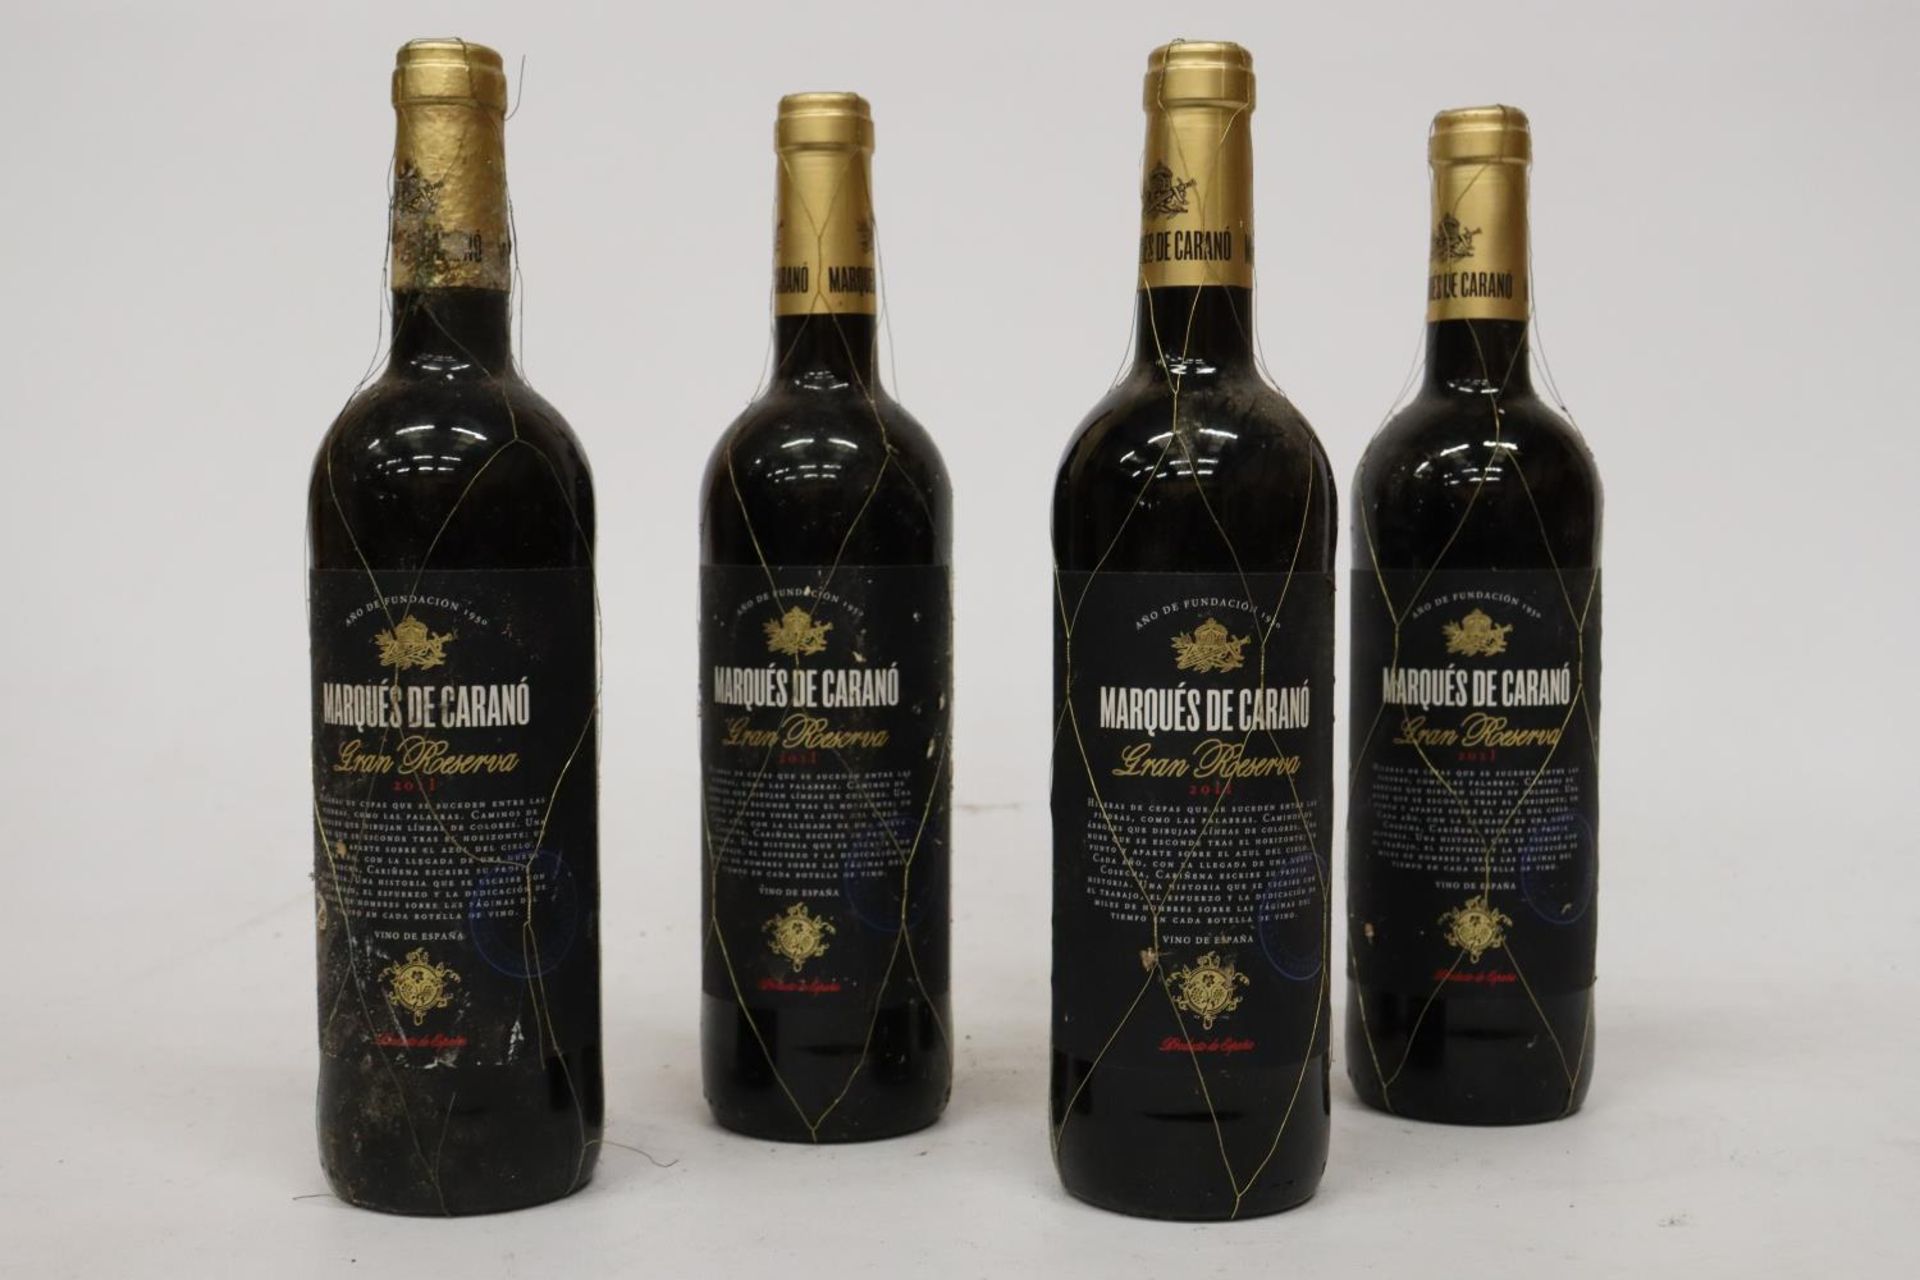 FOUR BOTTLES OF MARQUES DE CARANO GRAN RESERVA 2011 SPANISH RED WINE